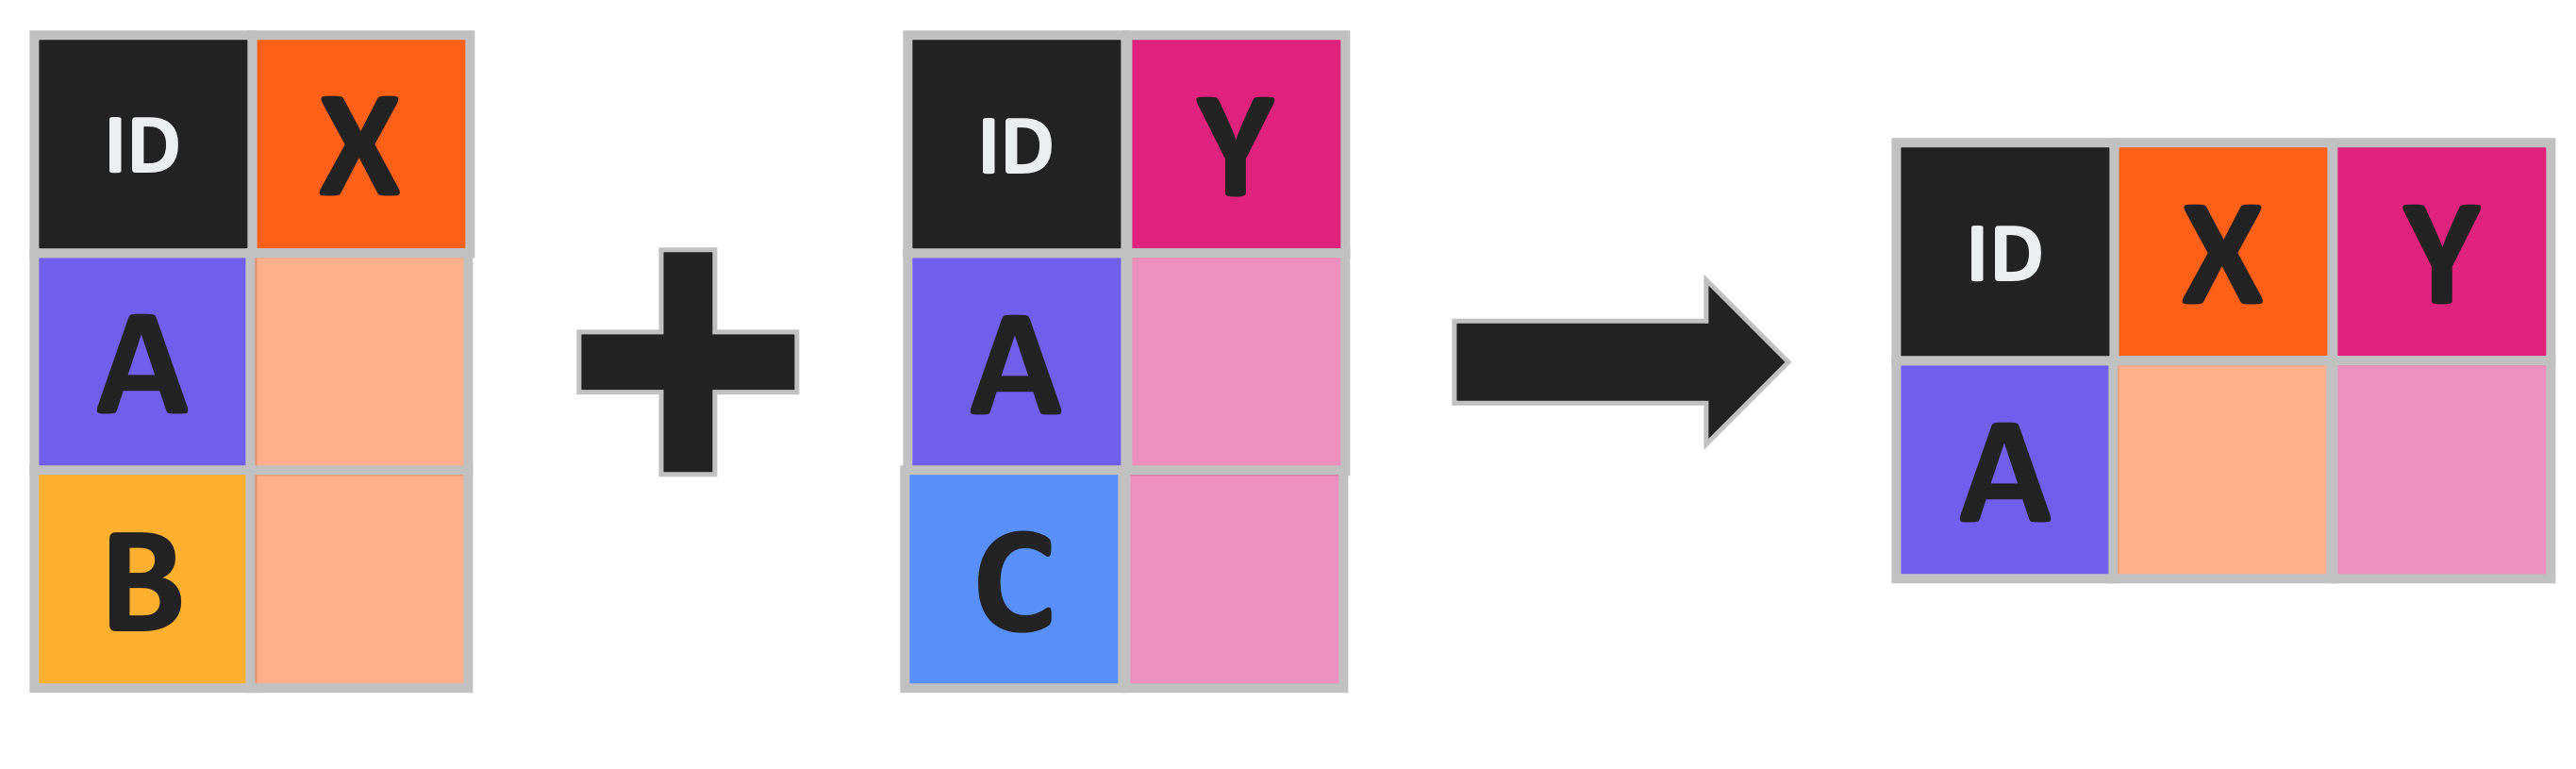 Table with an 'X' column and 'A' and 'B' rows gets joined with a second table with a 'Y' column and 'A' and 'C' rows to produce a single table with 'X' and Y' columns and only an 'A' row